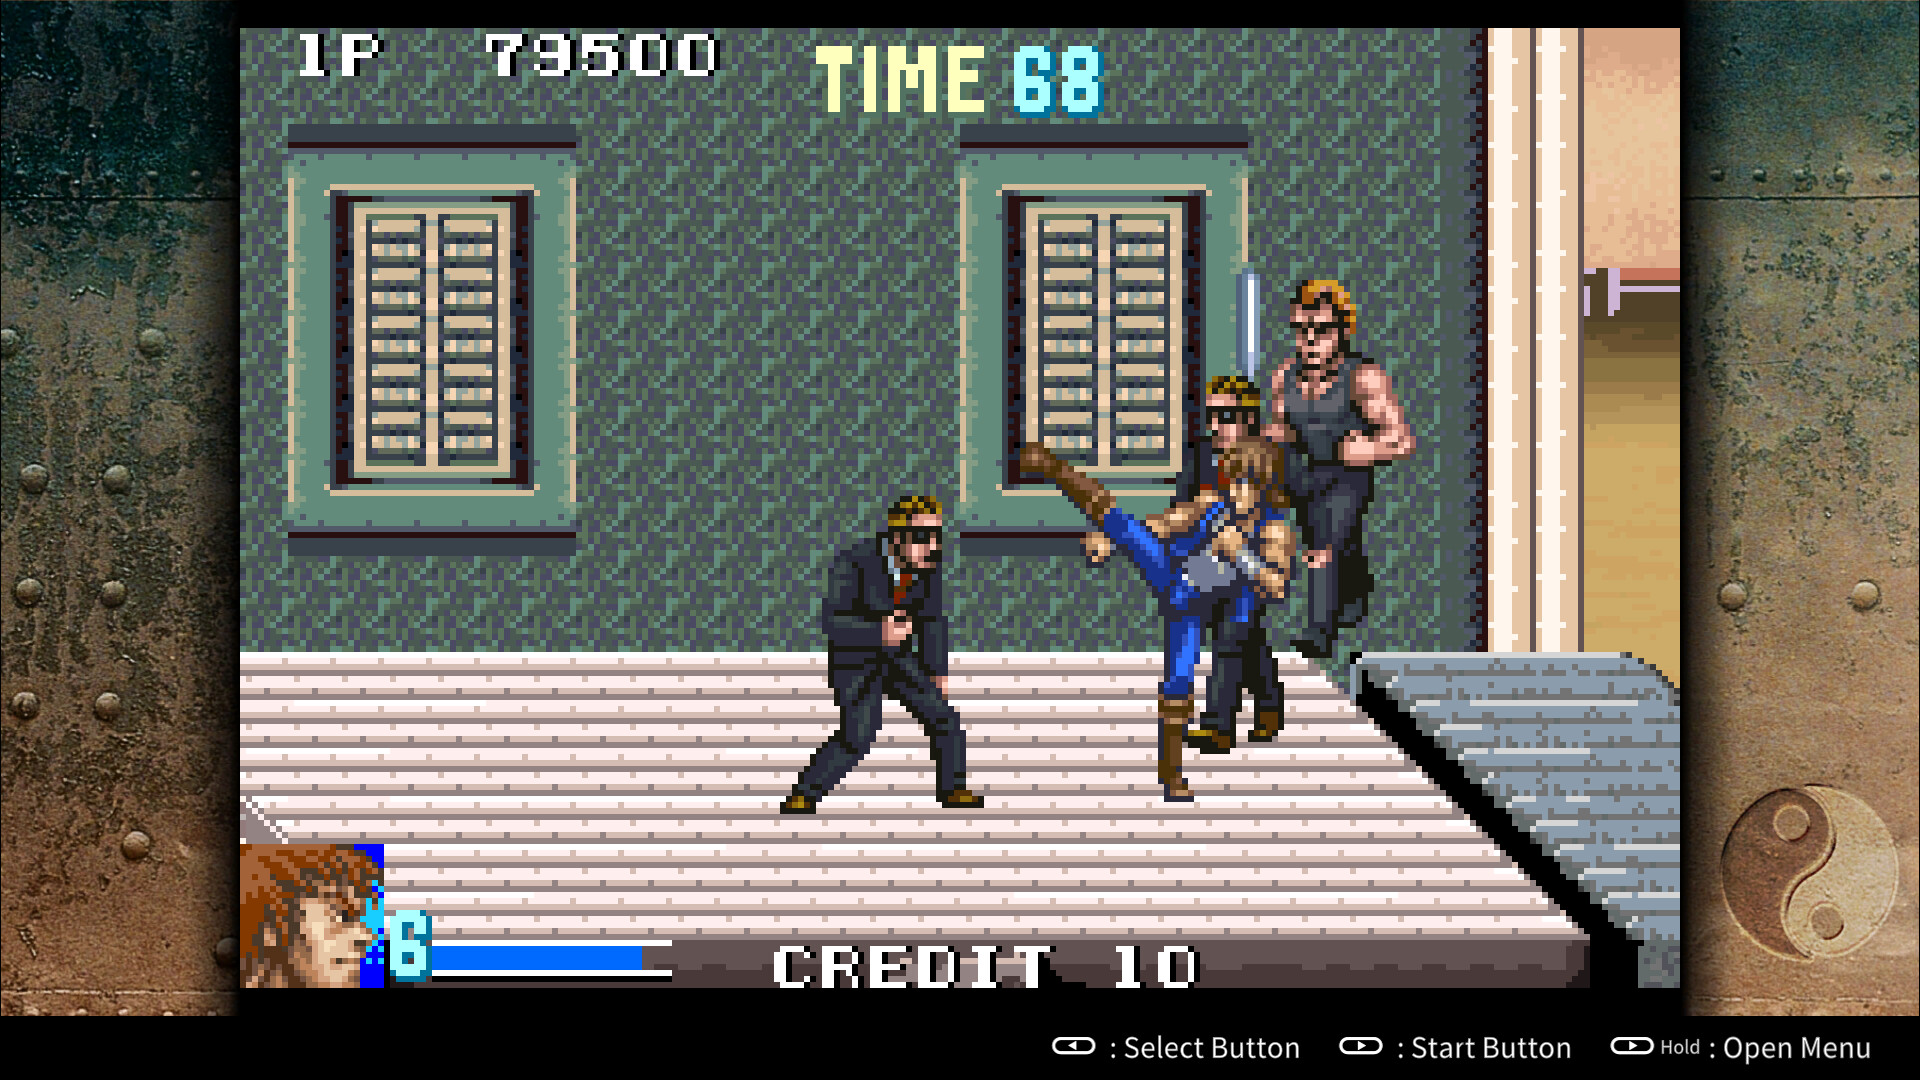 Double Dragon Gaiden: Rise Of The Dragons Steam Charts & Stats